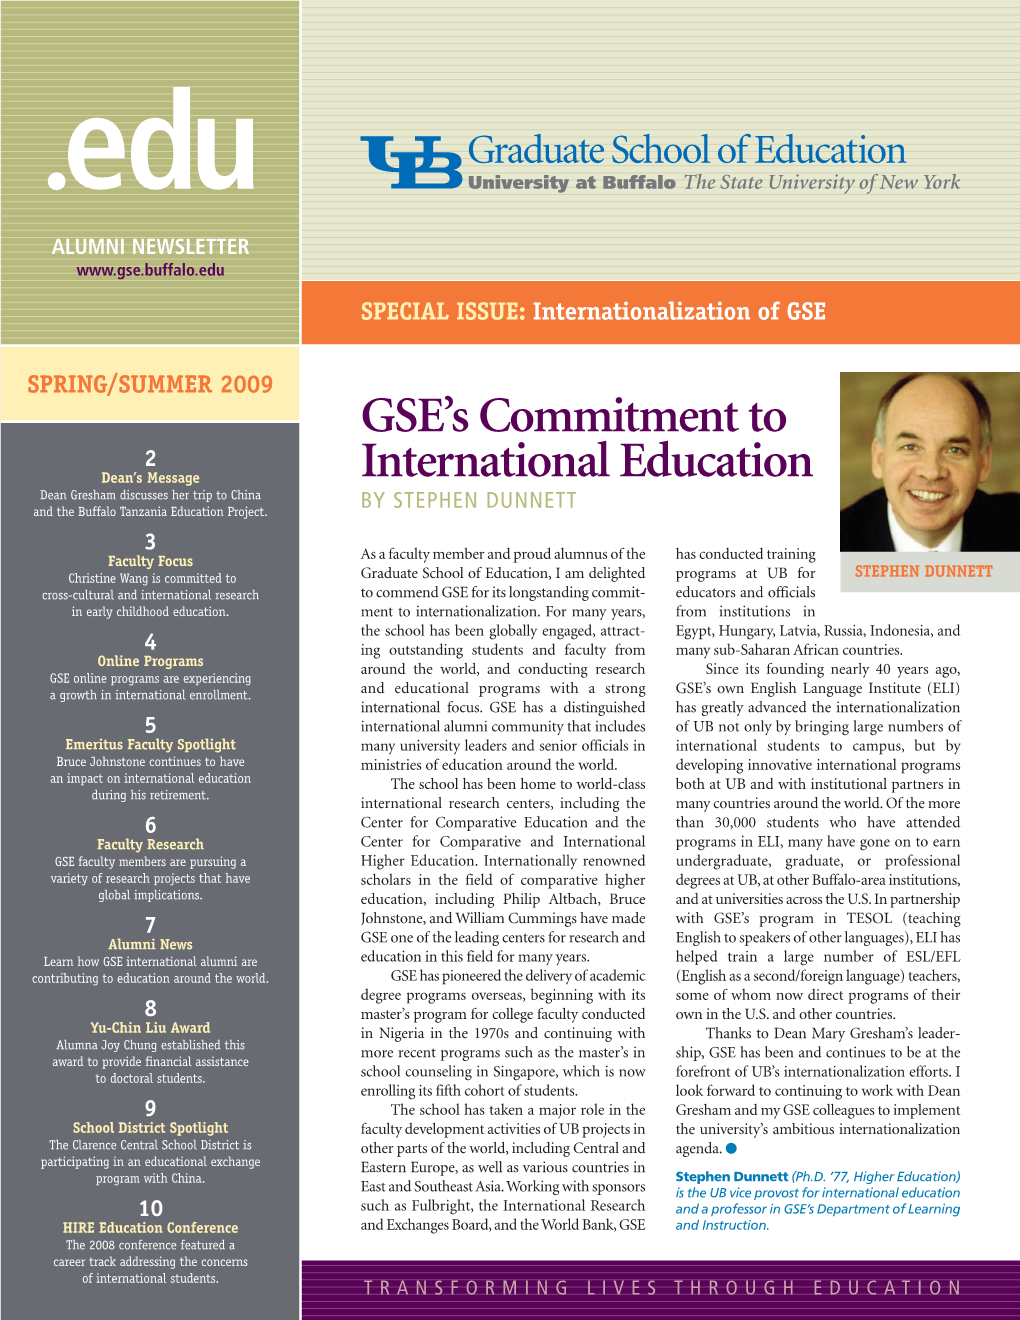 GSE's Commitment to International Education